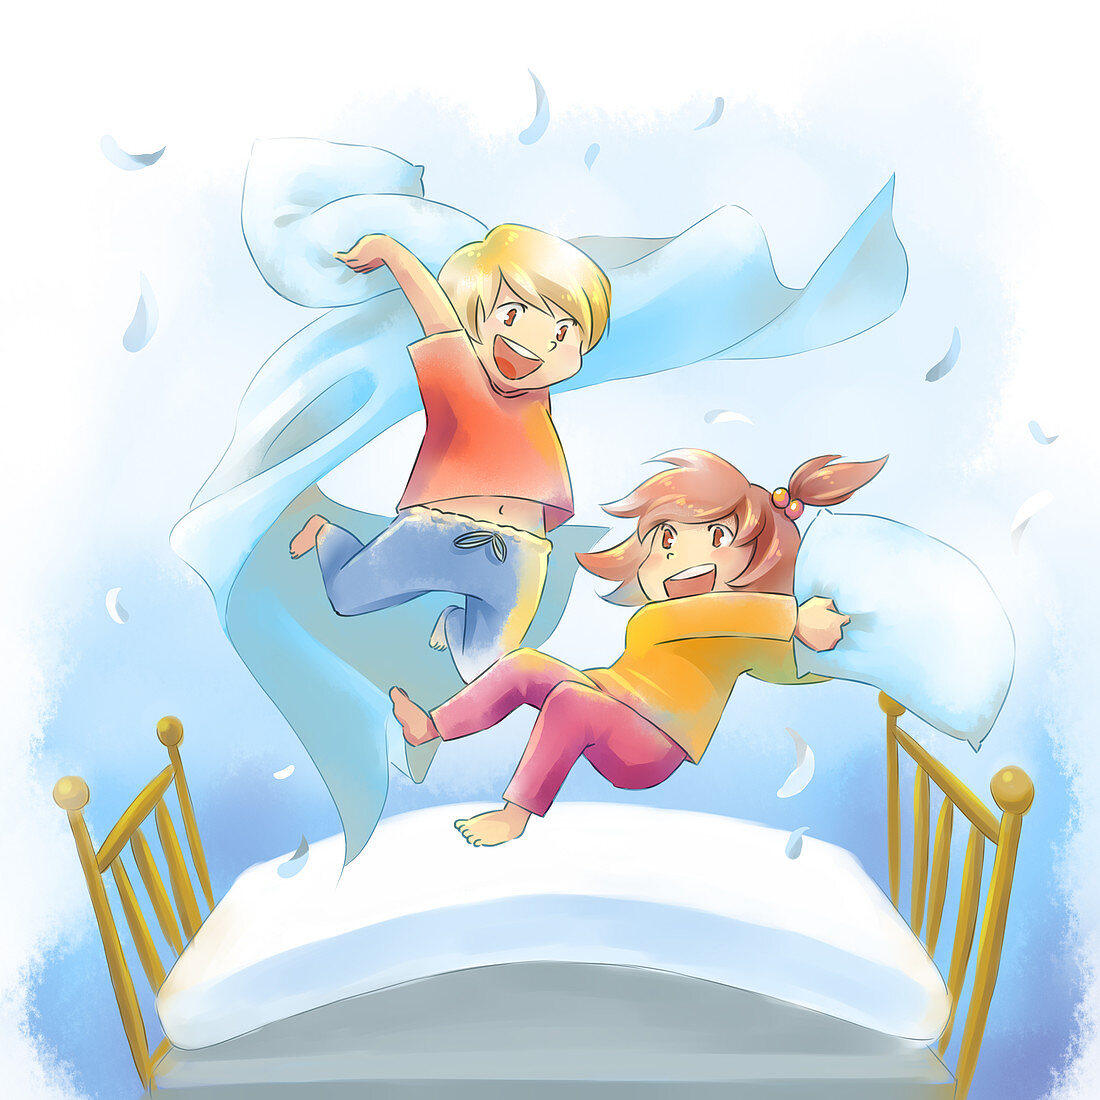 Illustration of happy children pillow fighting on bed